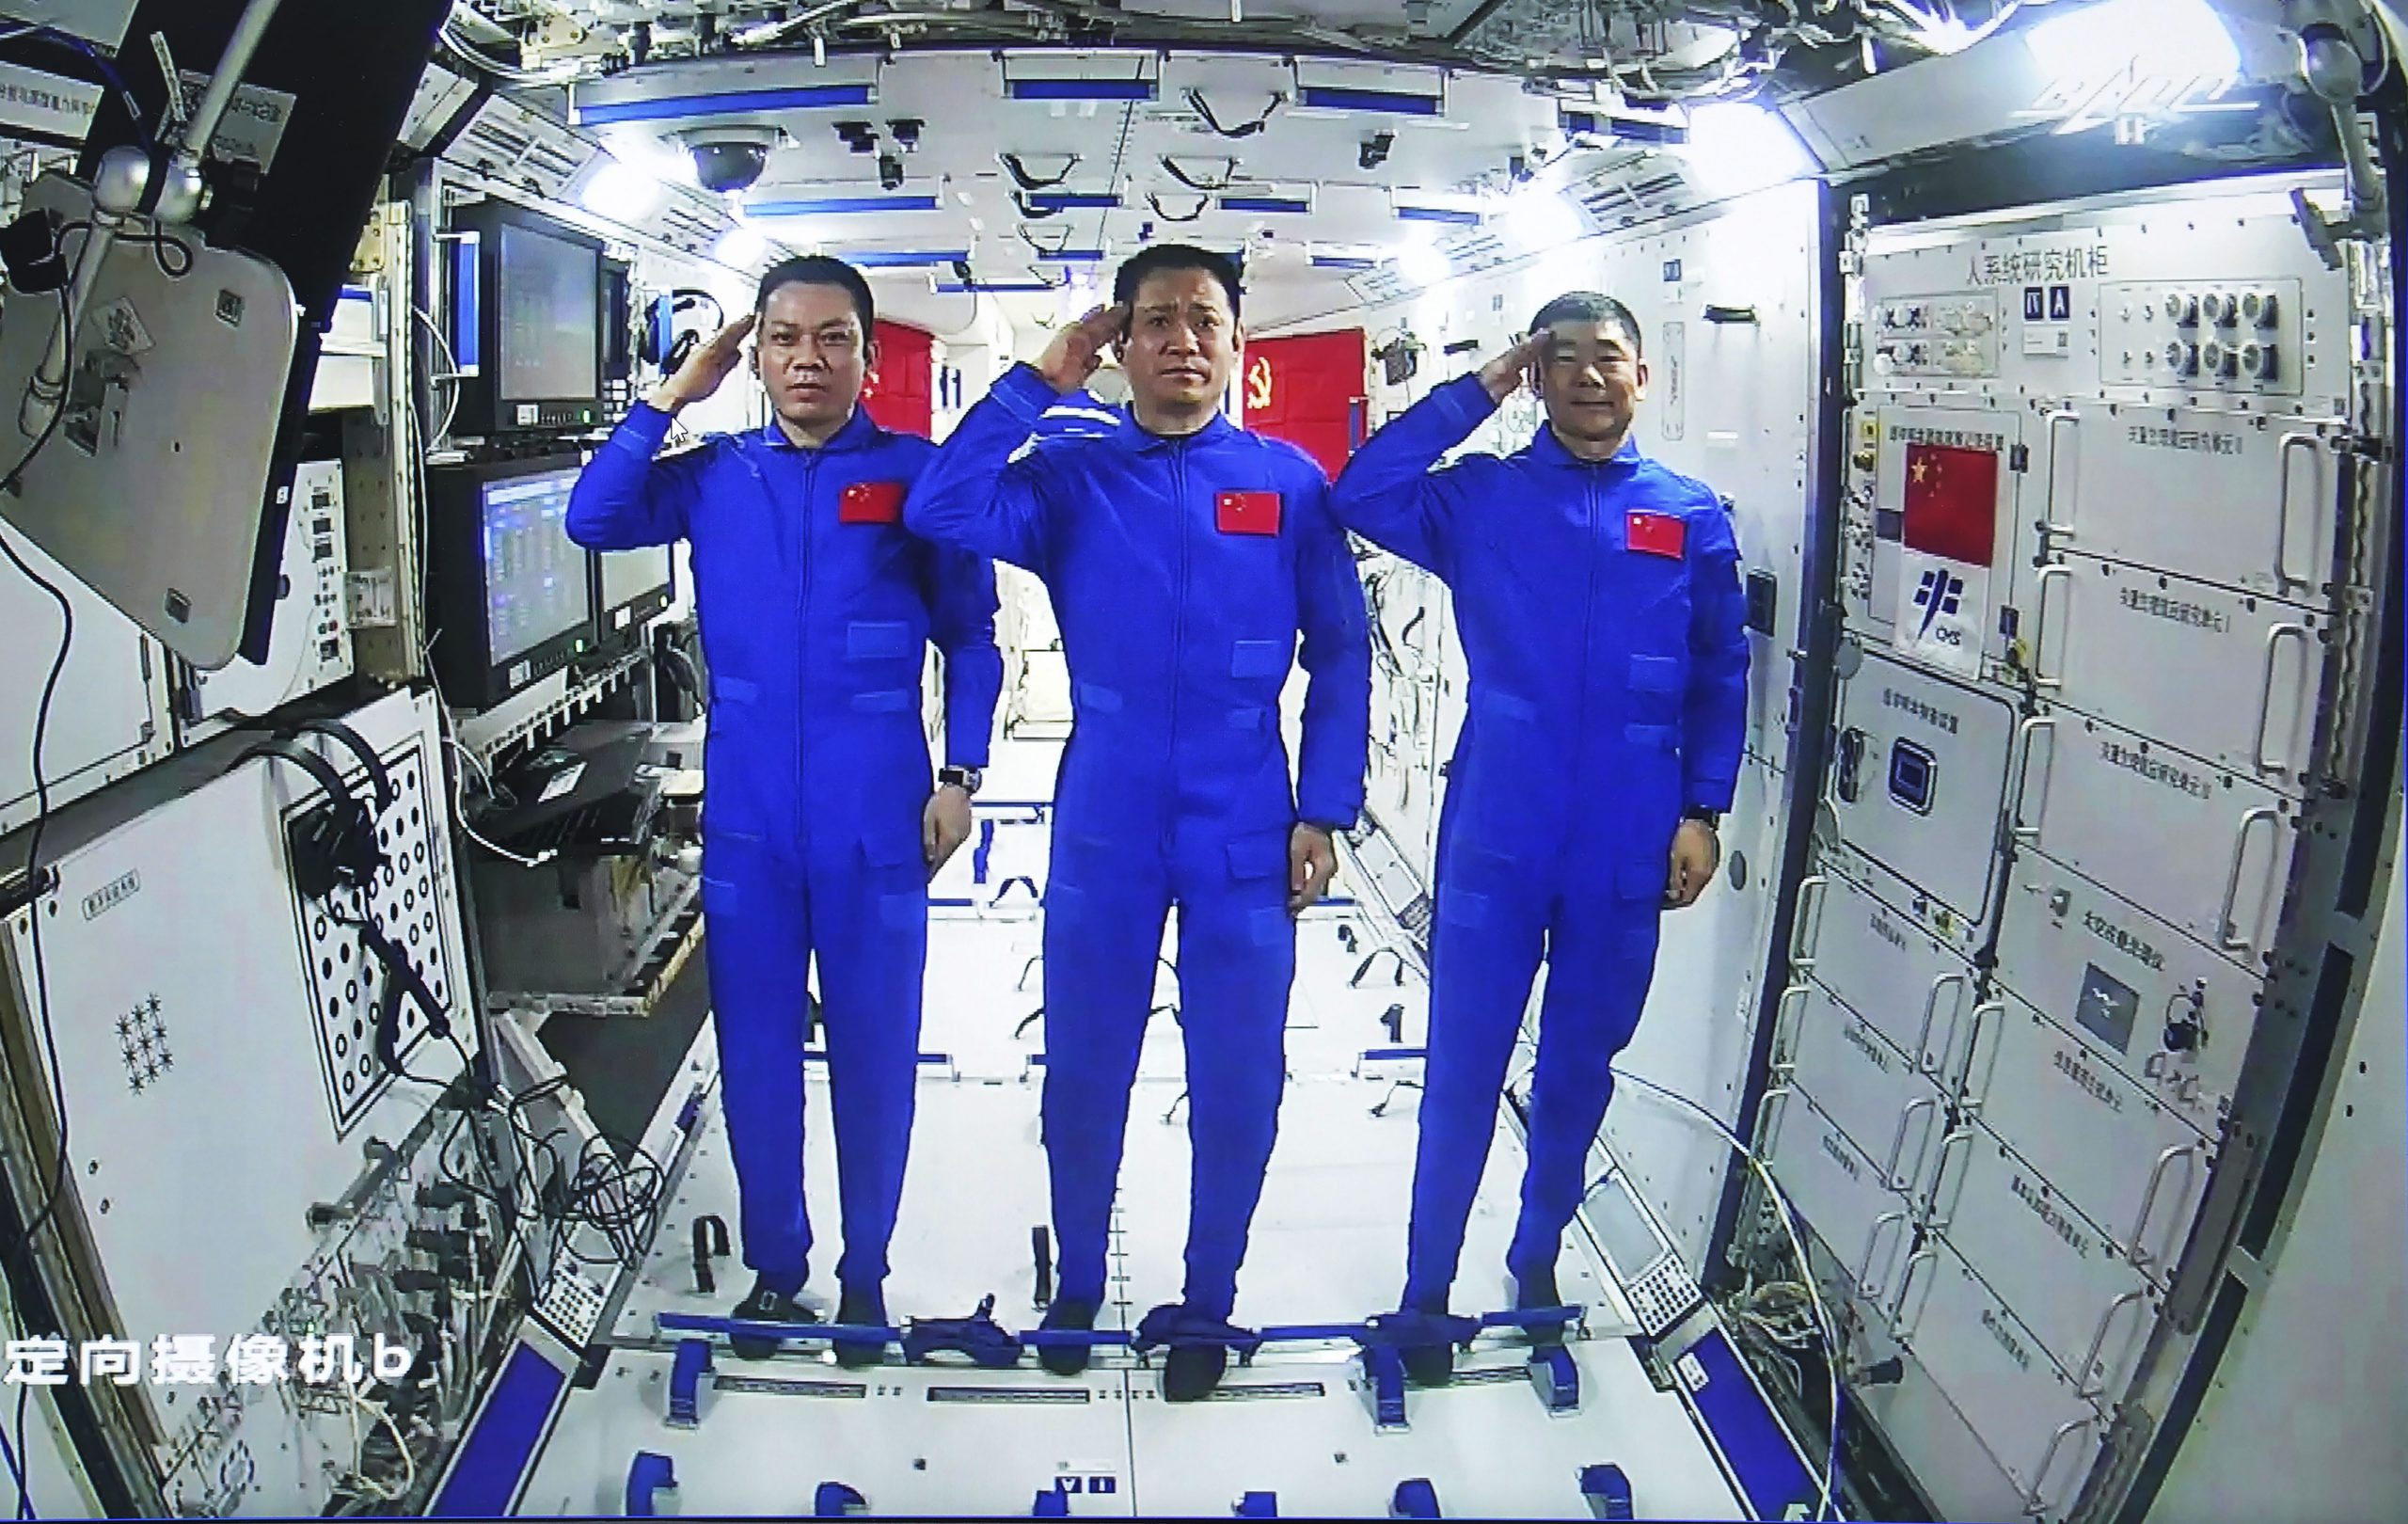 No rest in space: Chinese astronauts record their hectic day in station